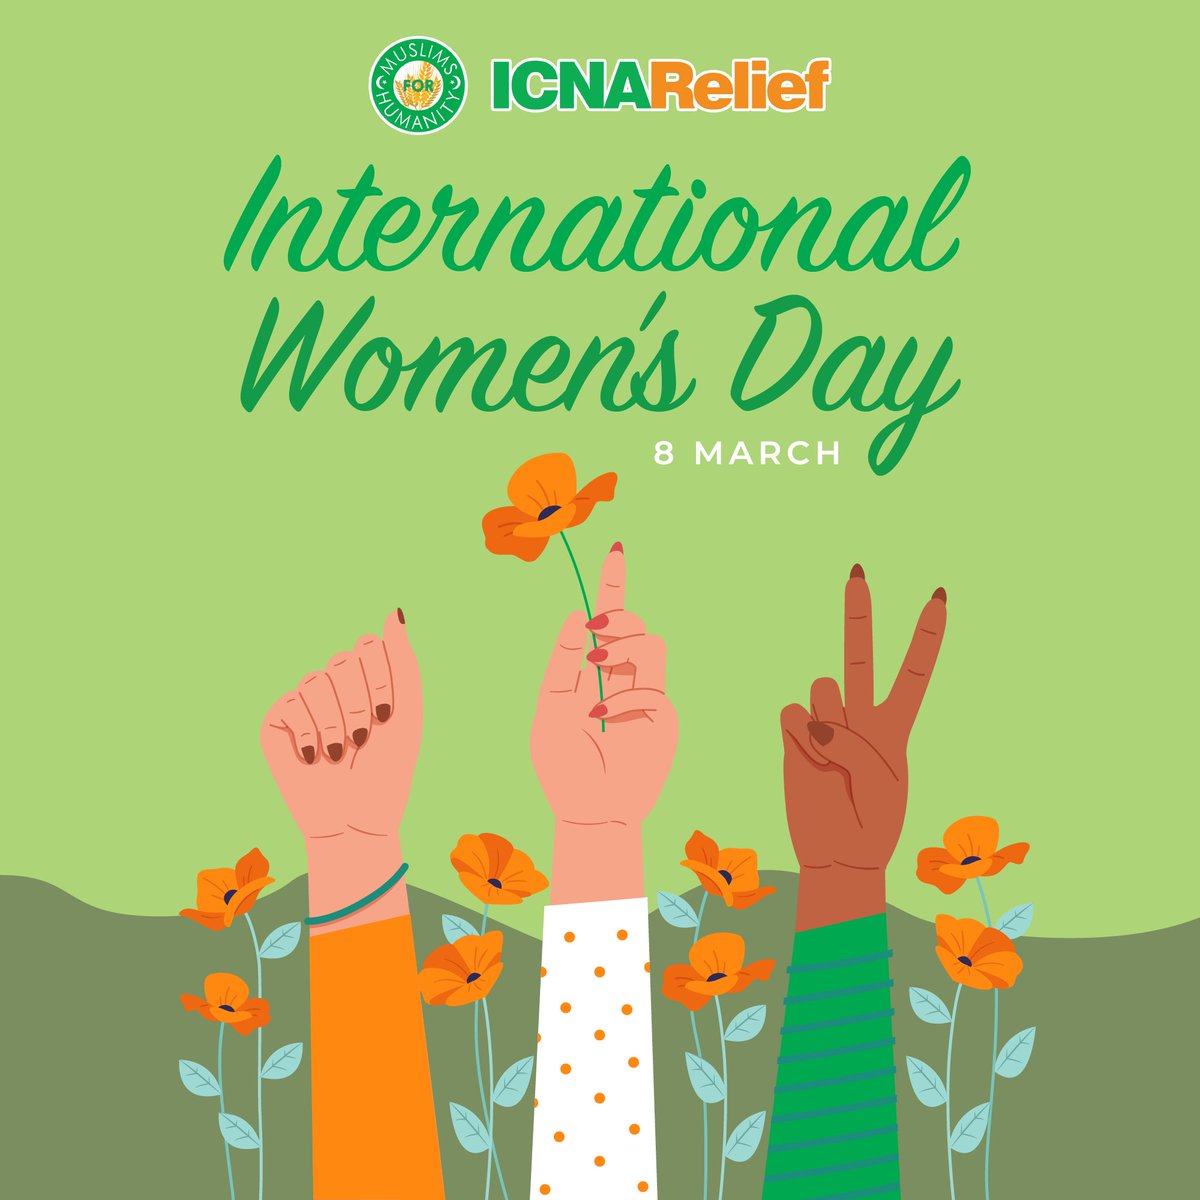 March 8th is International Women's Day. “No matter where you are in life, inspire and empower the women around you. Success is never reached alone and wisdom and wealth are sweeter shared.” We at ICNA Relief continue to empower resilient women through support, advocacy and